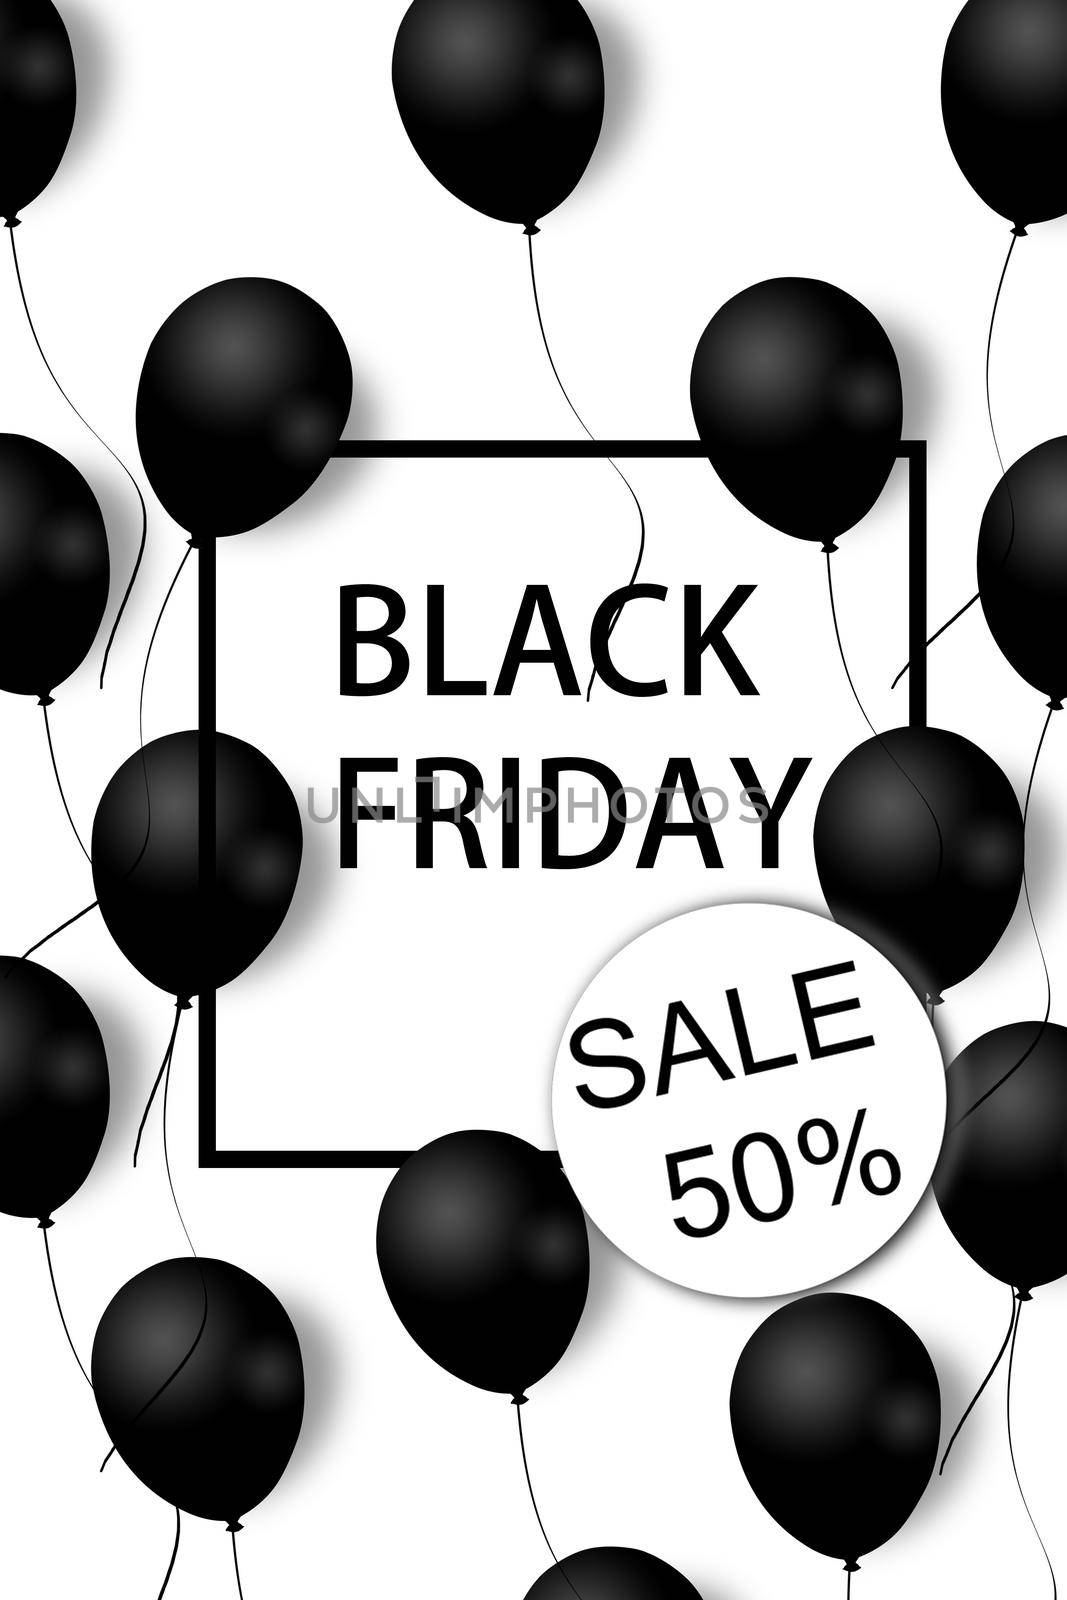 Black Friday Sale Poster with black balloons on white background with square frame. Illustration. Pattern